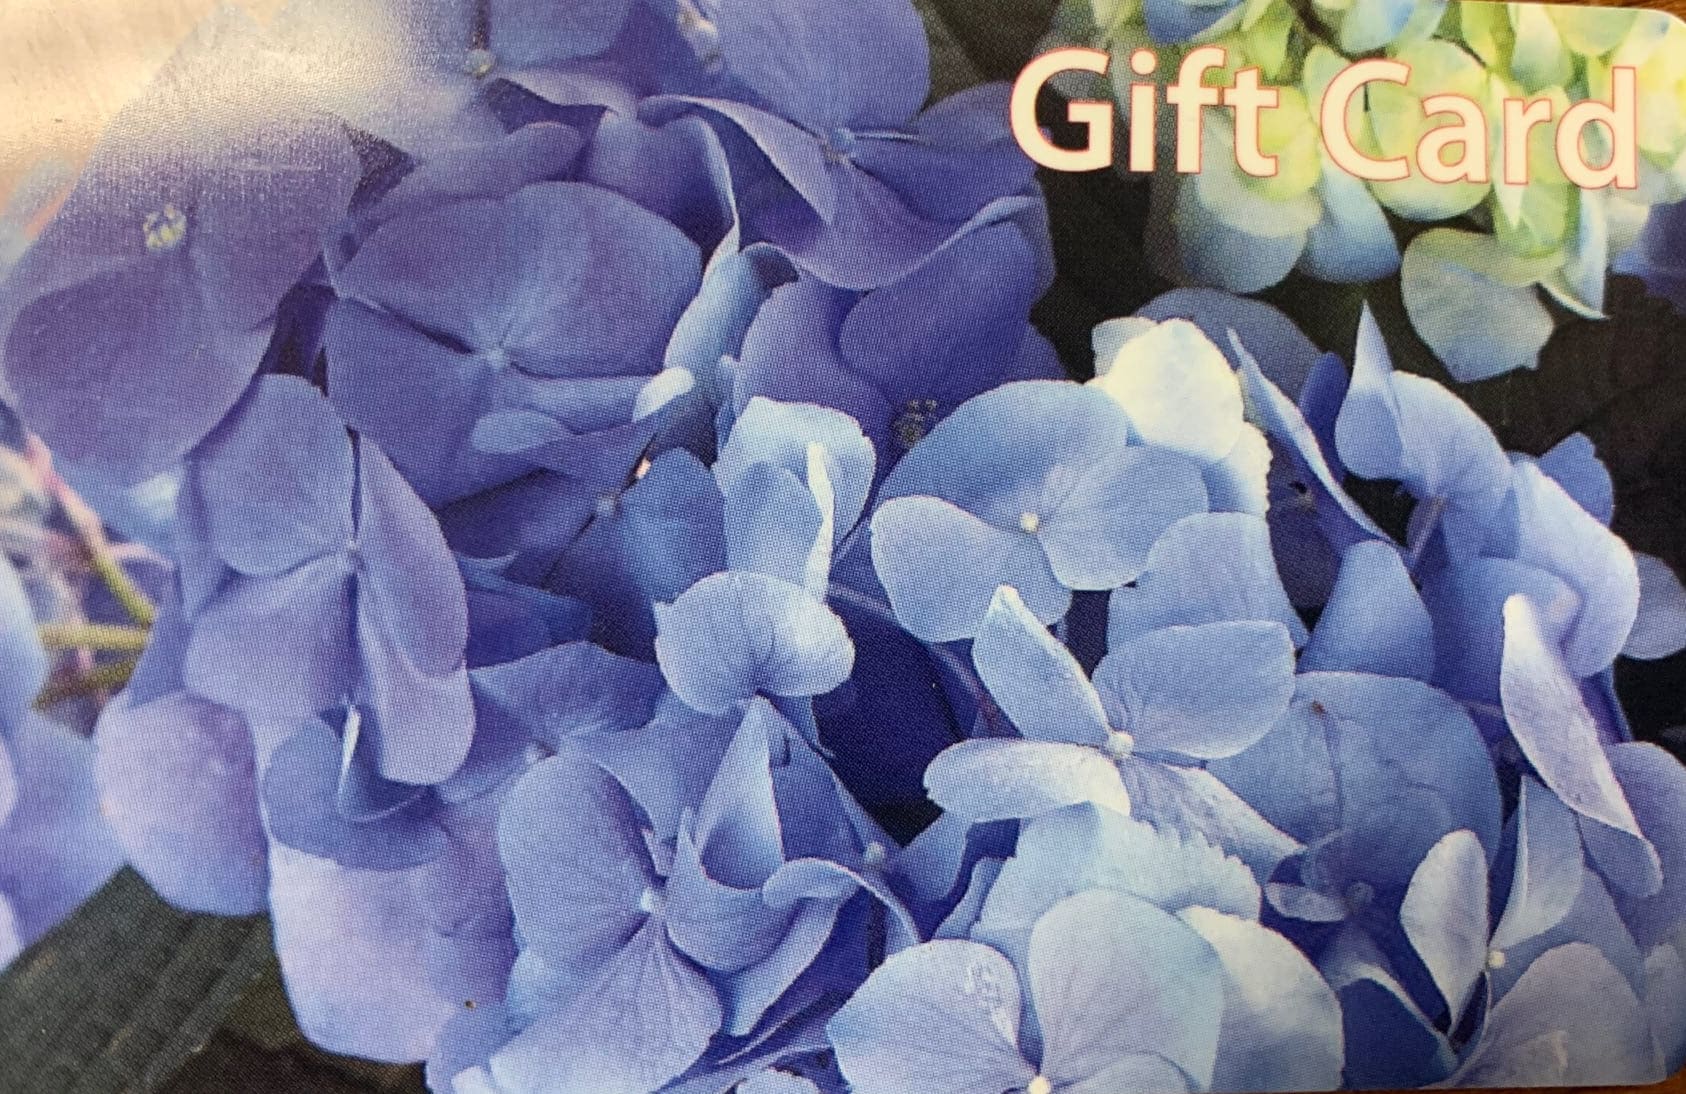 $250 Gift Card - Introducing the Exceptional Flowers &amp; Gifts $250 Gift Card, the perfect gift for anyone who appreciates the finest in floral arrangements, artisan chocolates, balloons, teddy bears, or handmade soaps. This versatile gift card can be used for pick-up or delivery of exceptional products within our local area, including Boca Raton, Delray Beach, Deerfield Beach, Boynton Beach, and Highland Beach.  With the Exceptional Flowers &amp; Gifts $250 Gift Card, your recipient will have the opportunity to indulge in the beauty and fragrance of our exquisite flower arrangements. Our skilled florists create stunning arrangements using the highest quality blooms, ensuring that each bouquet is a work of art that brings joy and delight to its recipient. From classic roses to vibrant mixed arrangements, there is something for every taste and occasion.  For those with a sweet tooth, our artisan chocolates are a true delight. Made with the finest ingredients and crafted with exceptional skill, these chocolates offer a decadent experience and will delight the senses. Whether it's a box of assorted chocolates, chocolate-covered strawberries, or a custom-made chocolate creation, our selection is sure to satisfy even the most discerning chocolate lover.  Balloons add a touch of fun and celebration to any occasion, and our collection of balloons is sure to bring a smile to anyone's face. From cheerful and colorful designs to elegant and glamorous options, there is a balloon for every celebration. Let your loved one bask in the joy and excitement that balloons bring with our diverse selection.  Our collection of soft and cuddly teddy bears is perfect for those who appreciate a heartfelt and adorable gift. Whether for a child or a loved one, these plush companions are sure to bring comfort and warmth. From classic bears to whimsical characters, each teddy bear is made with the utmost care and attention to detail.  Handmade soaps provide a luxurious and pampering experience. Our selection of artisan soaps is crafted with natural ingredients, nourishing the skin and leaving it feeling soft and supple. The enticing scents and beautiful designs make these soaps a treat for the senses, creating a spa-like experience in the comfort of one's own home.  With the Exceptional Flowers &amp; Gifts $250 Gift Card, you can be confident that your recipient will be able to choose the perfect gift to suit their preferences. Whether they opt for a stunning floral arrangement, delectable chocolates, festive balloons, adorable teddy bears, or indulgent handmade soaps, their gift will be a reflection of your thoughtfulness and generosity.  Present your loved one with the Exceptional Flowers &amp; Gifts $250 Gift Card and let them discover the joy of choosing their own exceptional gift. Whether for a special occasion or just to brighten someone's day, this gift card is the gateway to a world of beauty, joy, and heartfelt surprises. 